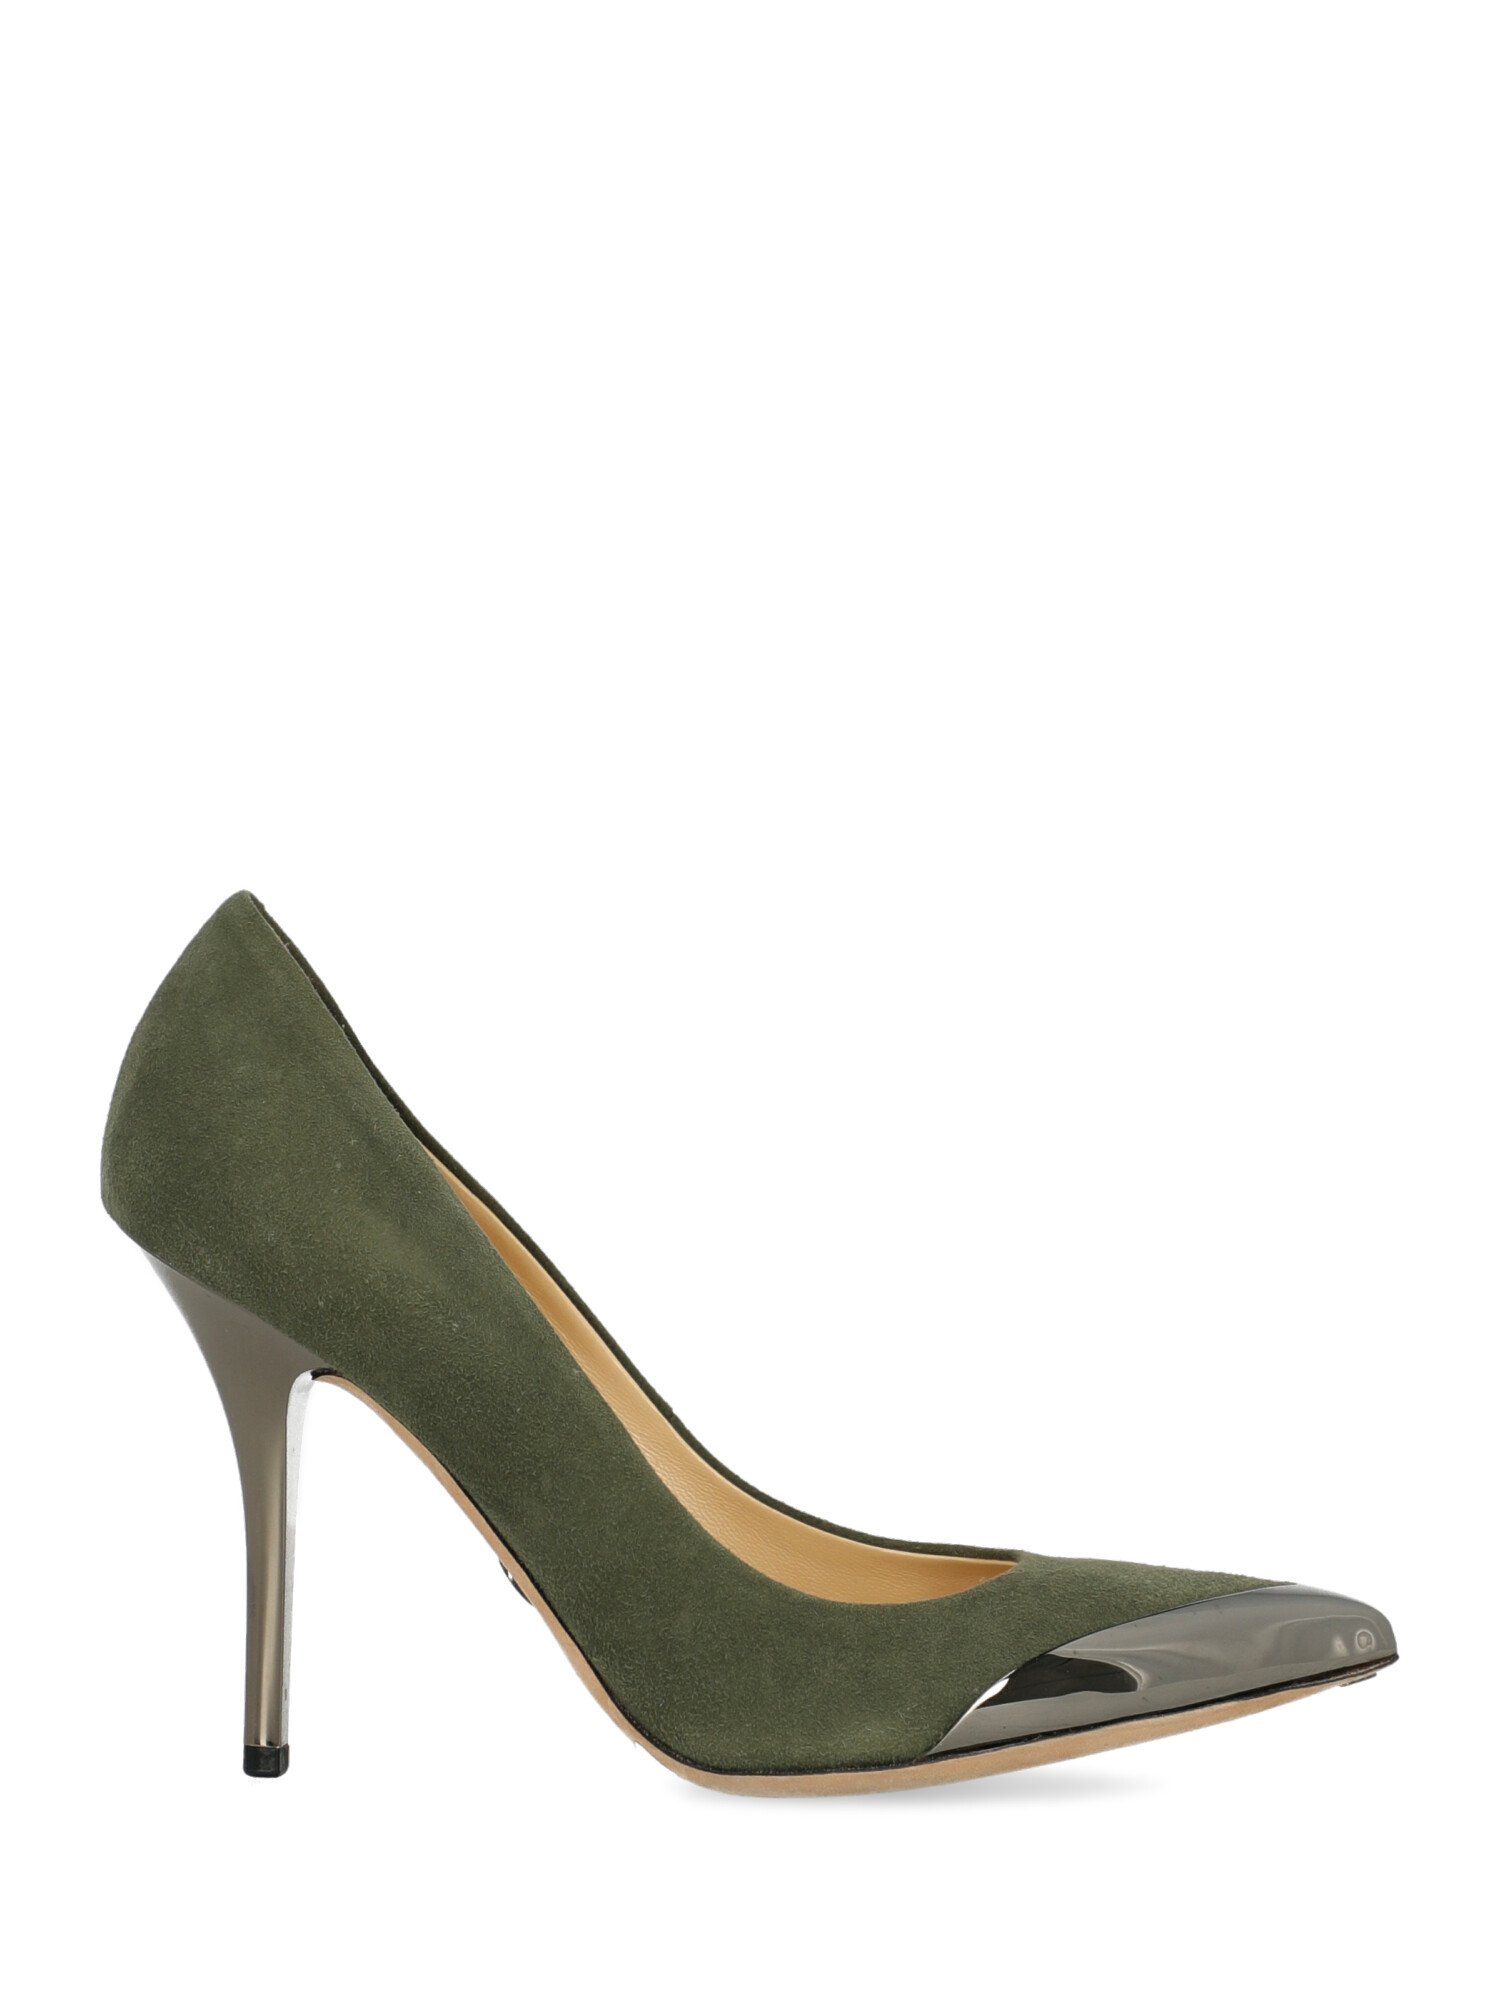 Pre-owned Emilio Pucci Shoe In Green